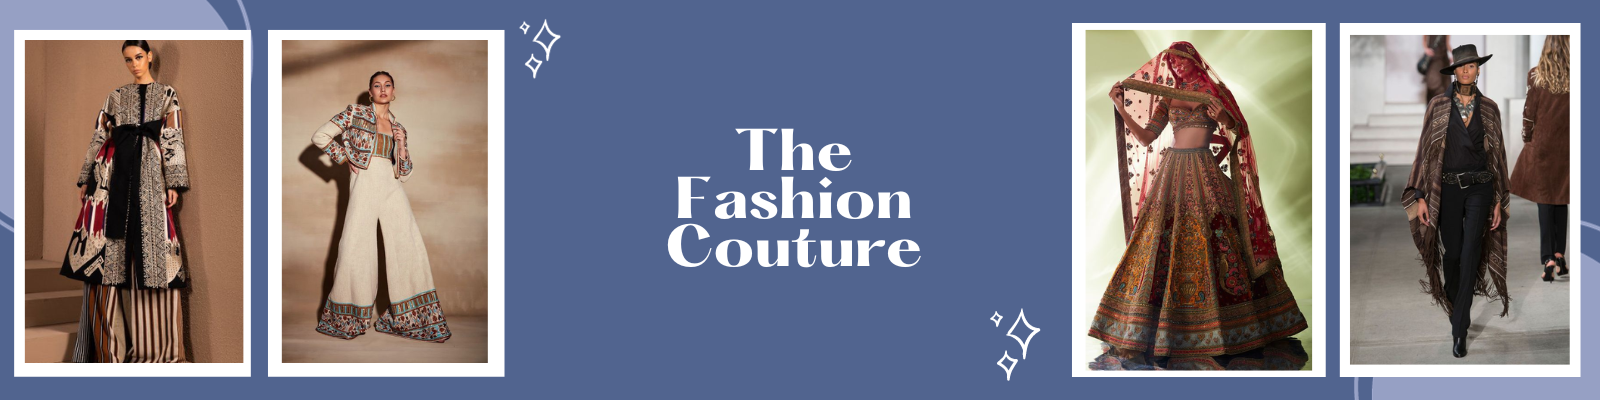 The Fashion Couture